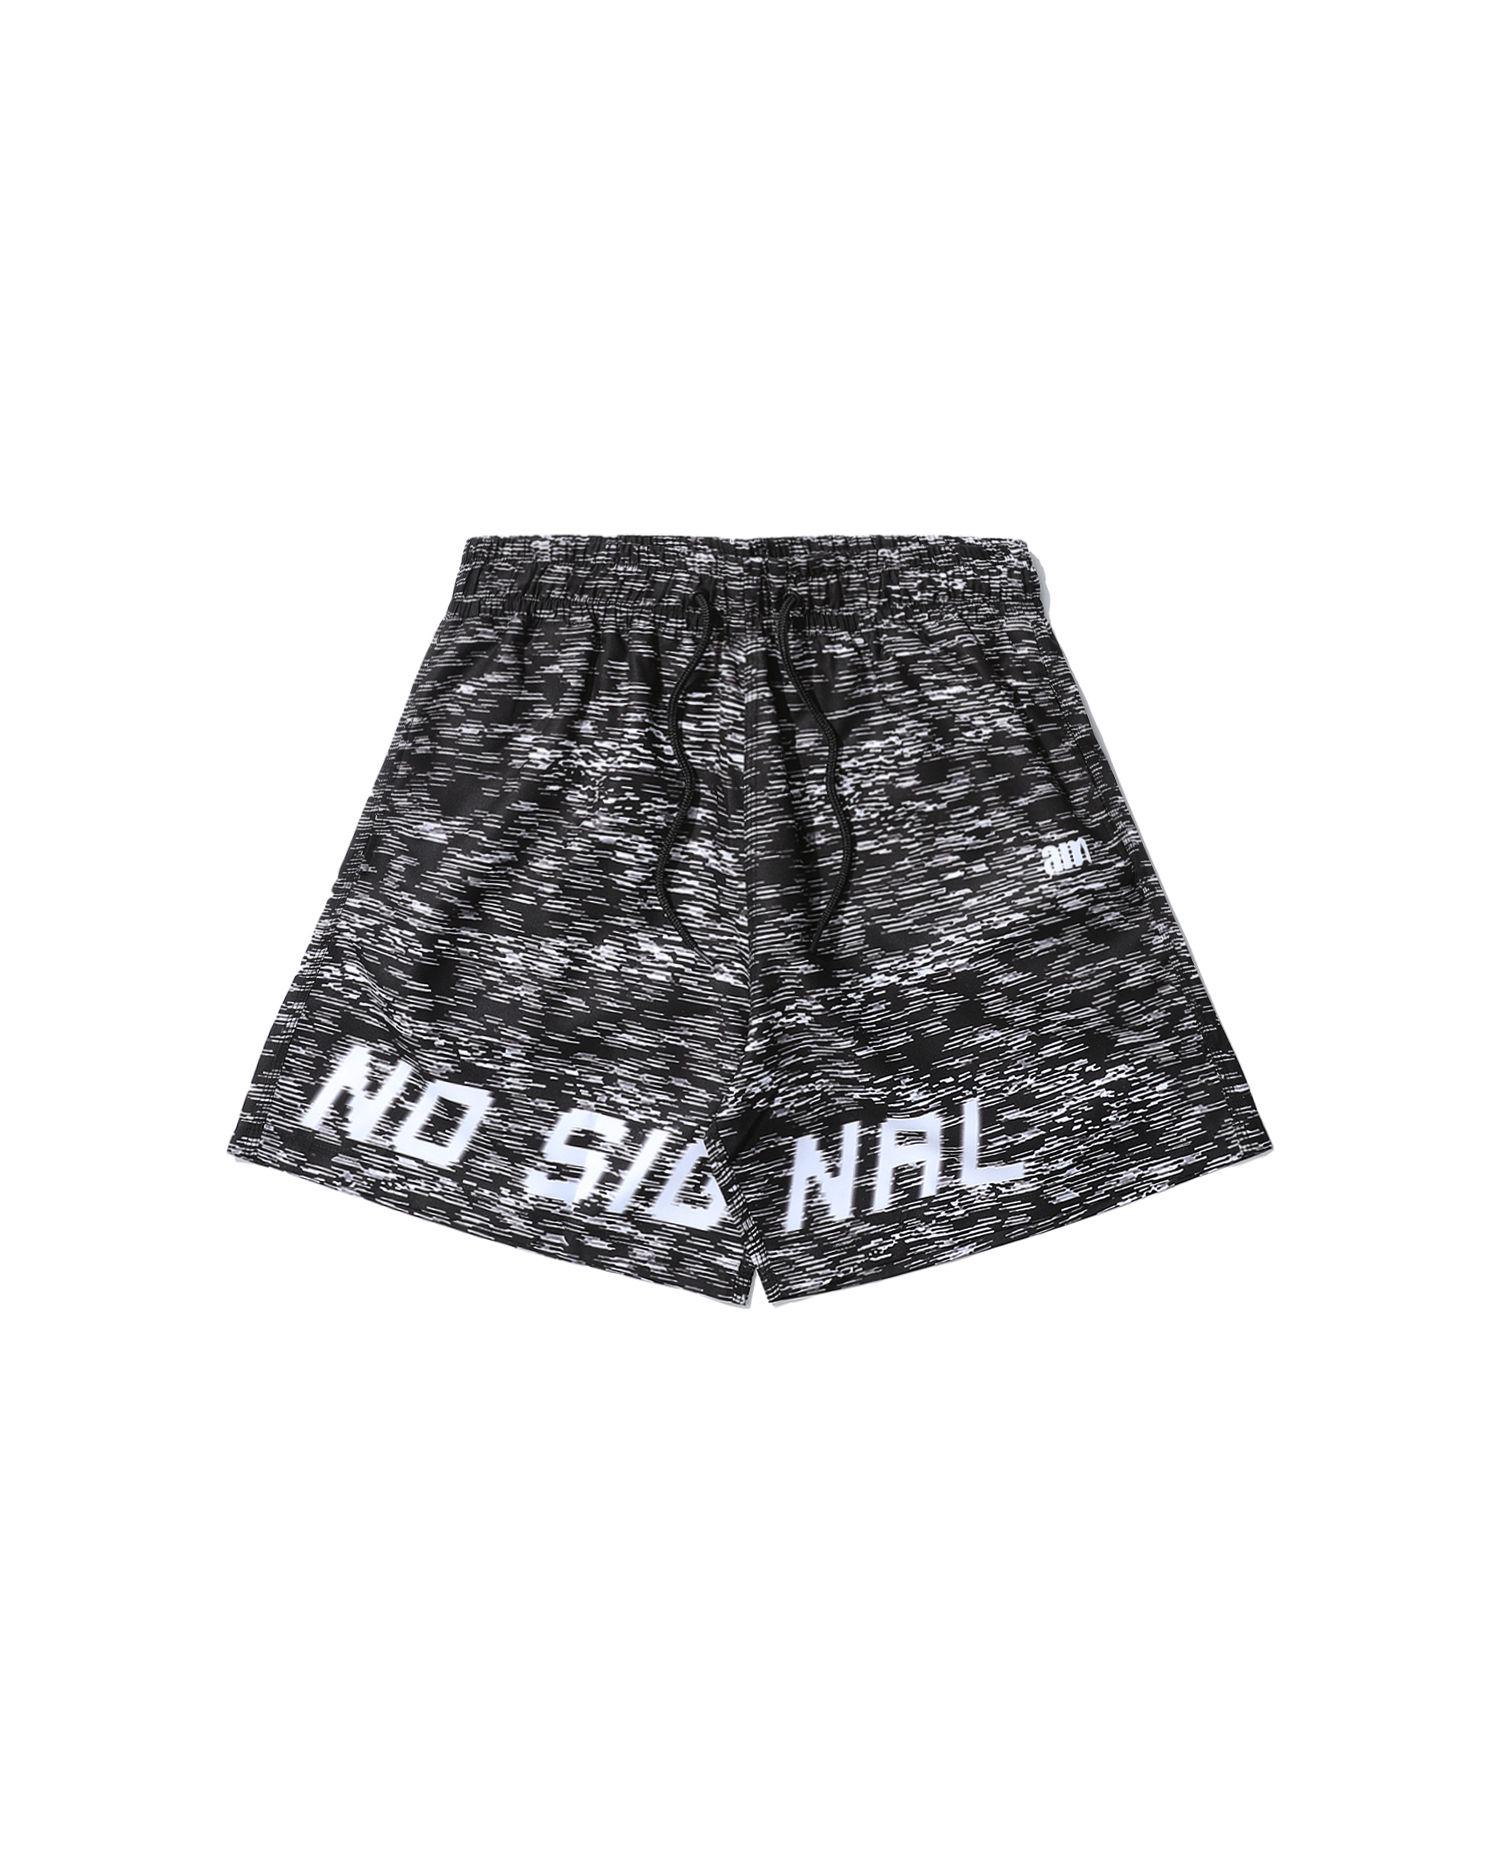 Swim or Chill shorts by AFTER MIDNIGHT